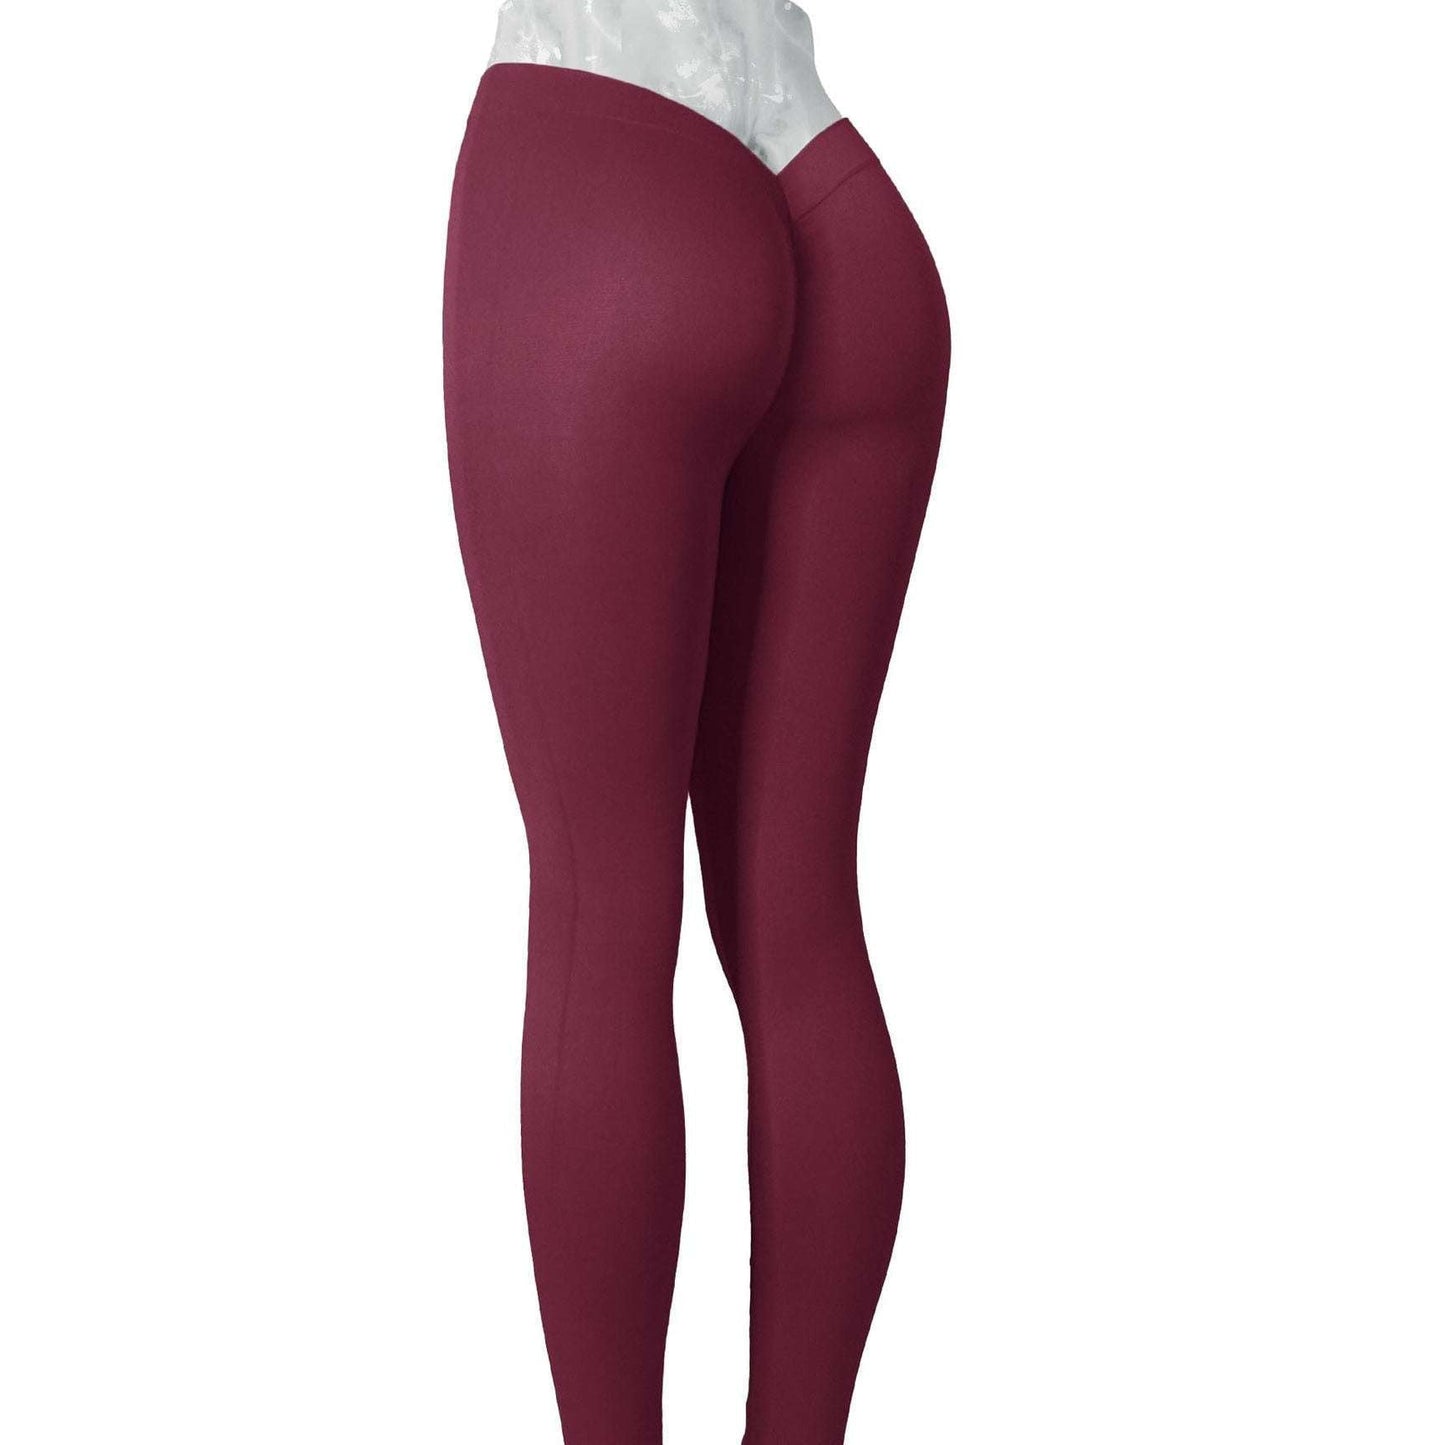 Durable Gym Wear, Flexible Fitness Leggings, Moisture-Wicking Yoga Pants - available at Sparq Mart